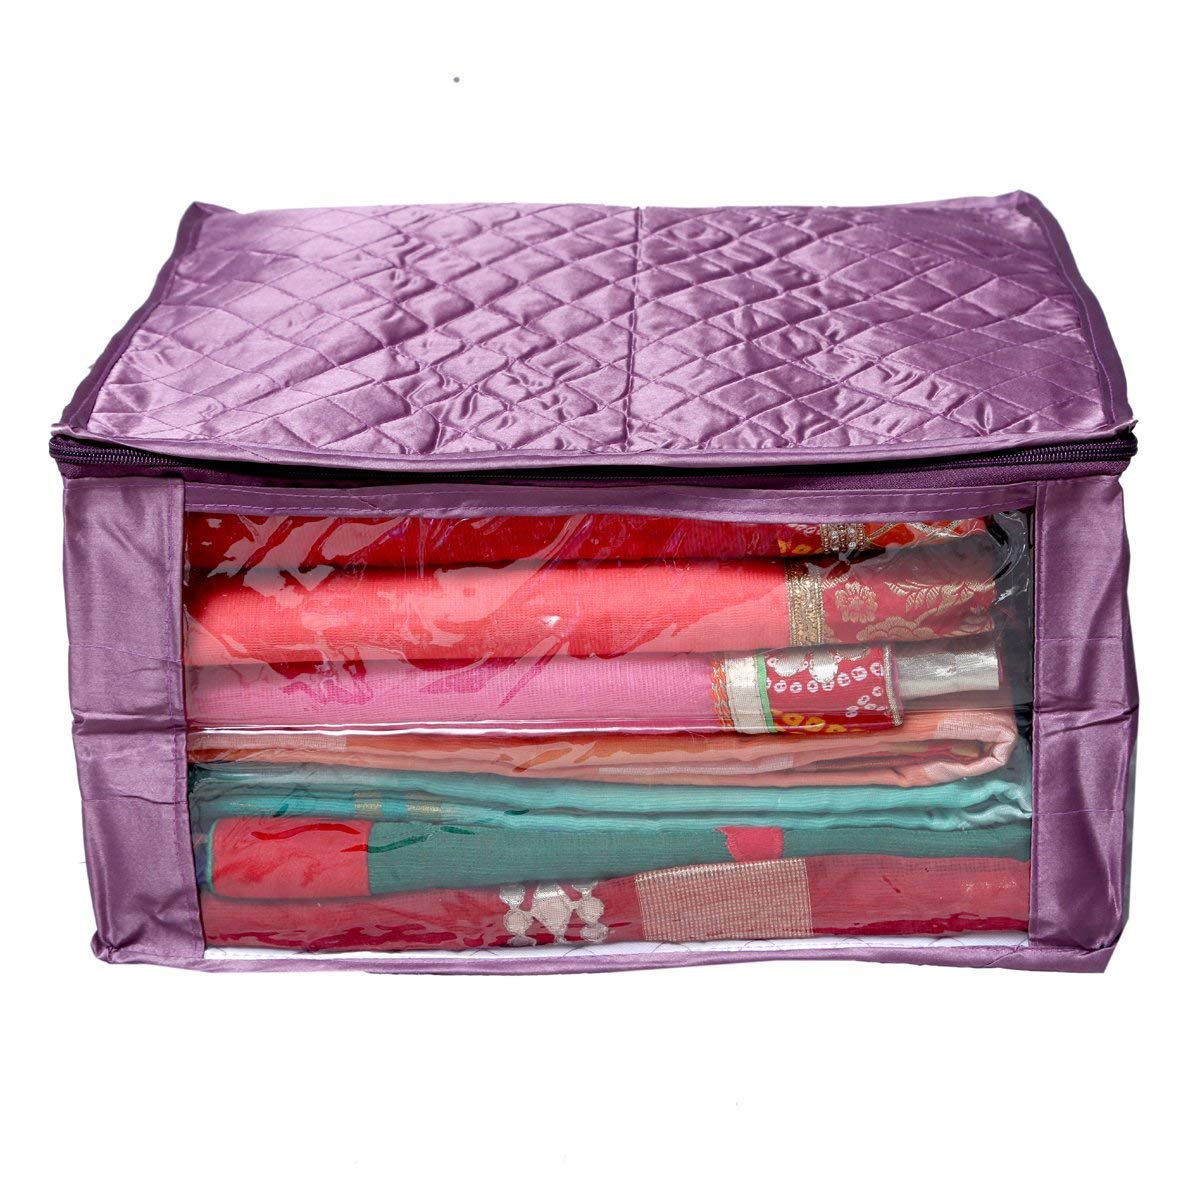 Kuber Industries Designer 2 Pieces Saree Cover Large Size in Purple Satin Material with Capacity of Upto 15 Sarees/Wedding Gift (Purple)-KUBMART2811